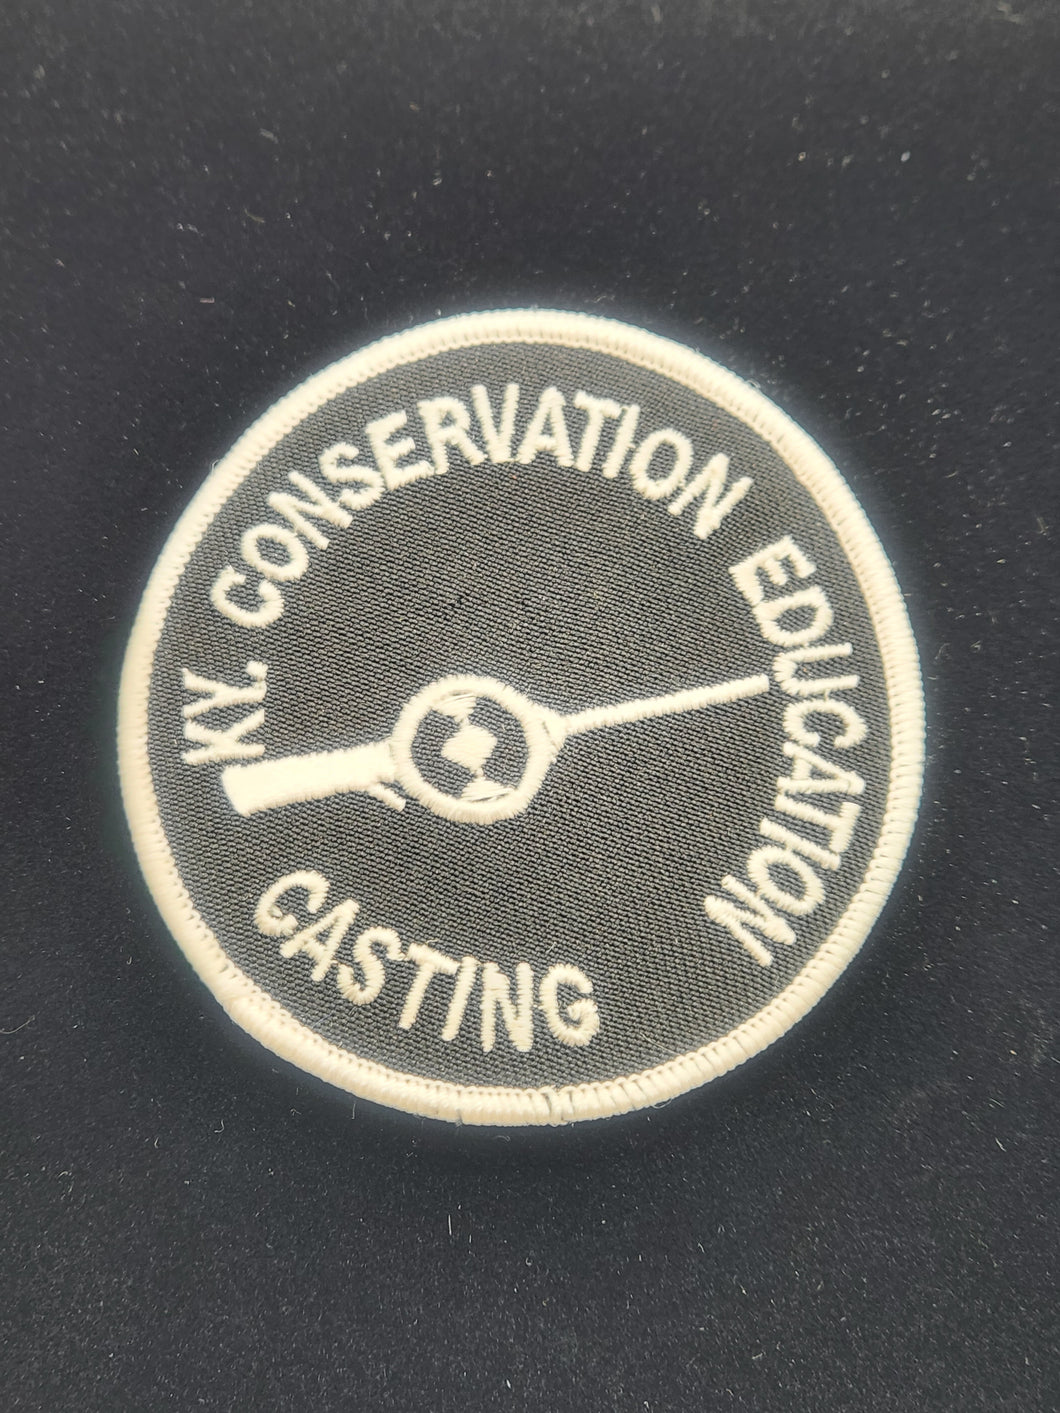 Vintage 1960s Kentucky Conservation Education Badge/Patches